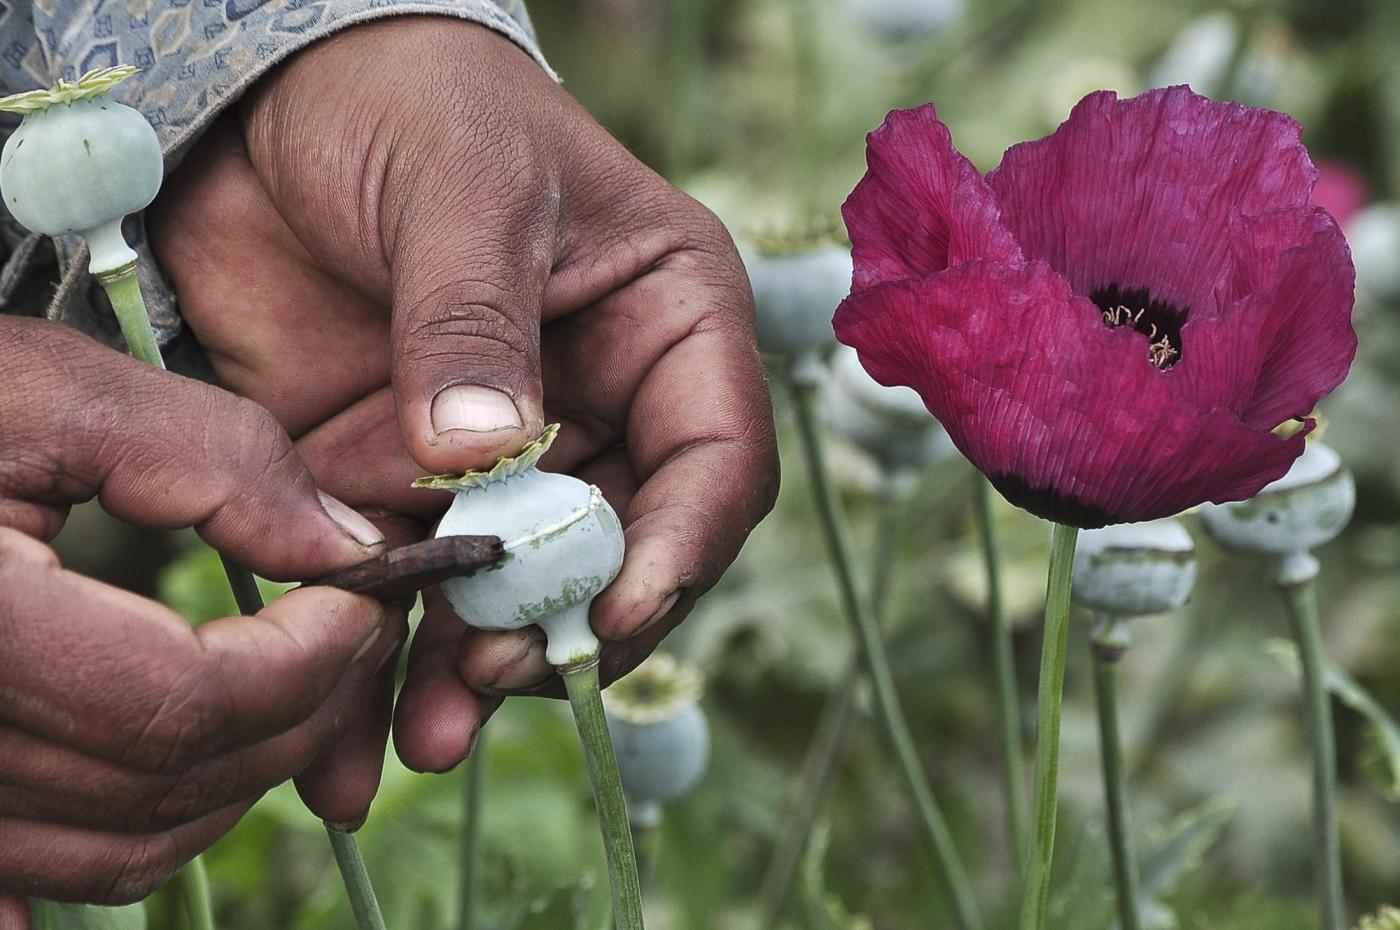 A man lances a poppy bulb to extract the sap, which will be used to make opium, at a field in the municipality of Heliodoro Castillo, in the mountain region of the state of Guerrero January 3, 2015. According to local media, 42% of the poppies produced in Mexico come from the state of Guerrero, where impoverished farmers in the mountain cultivate opium poppies as cash crop due to the extreme poverty in where they live. Picture taken January 3, 2015. REUTERS/Claudio Vargas (MEXICO - Tags: DRUGS SOCIETY POVERTY AGRICULTURE)